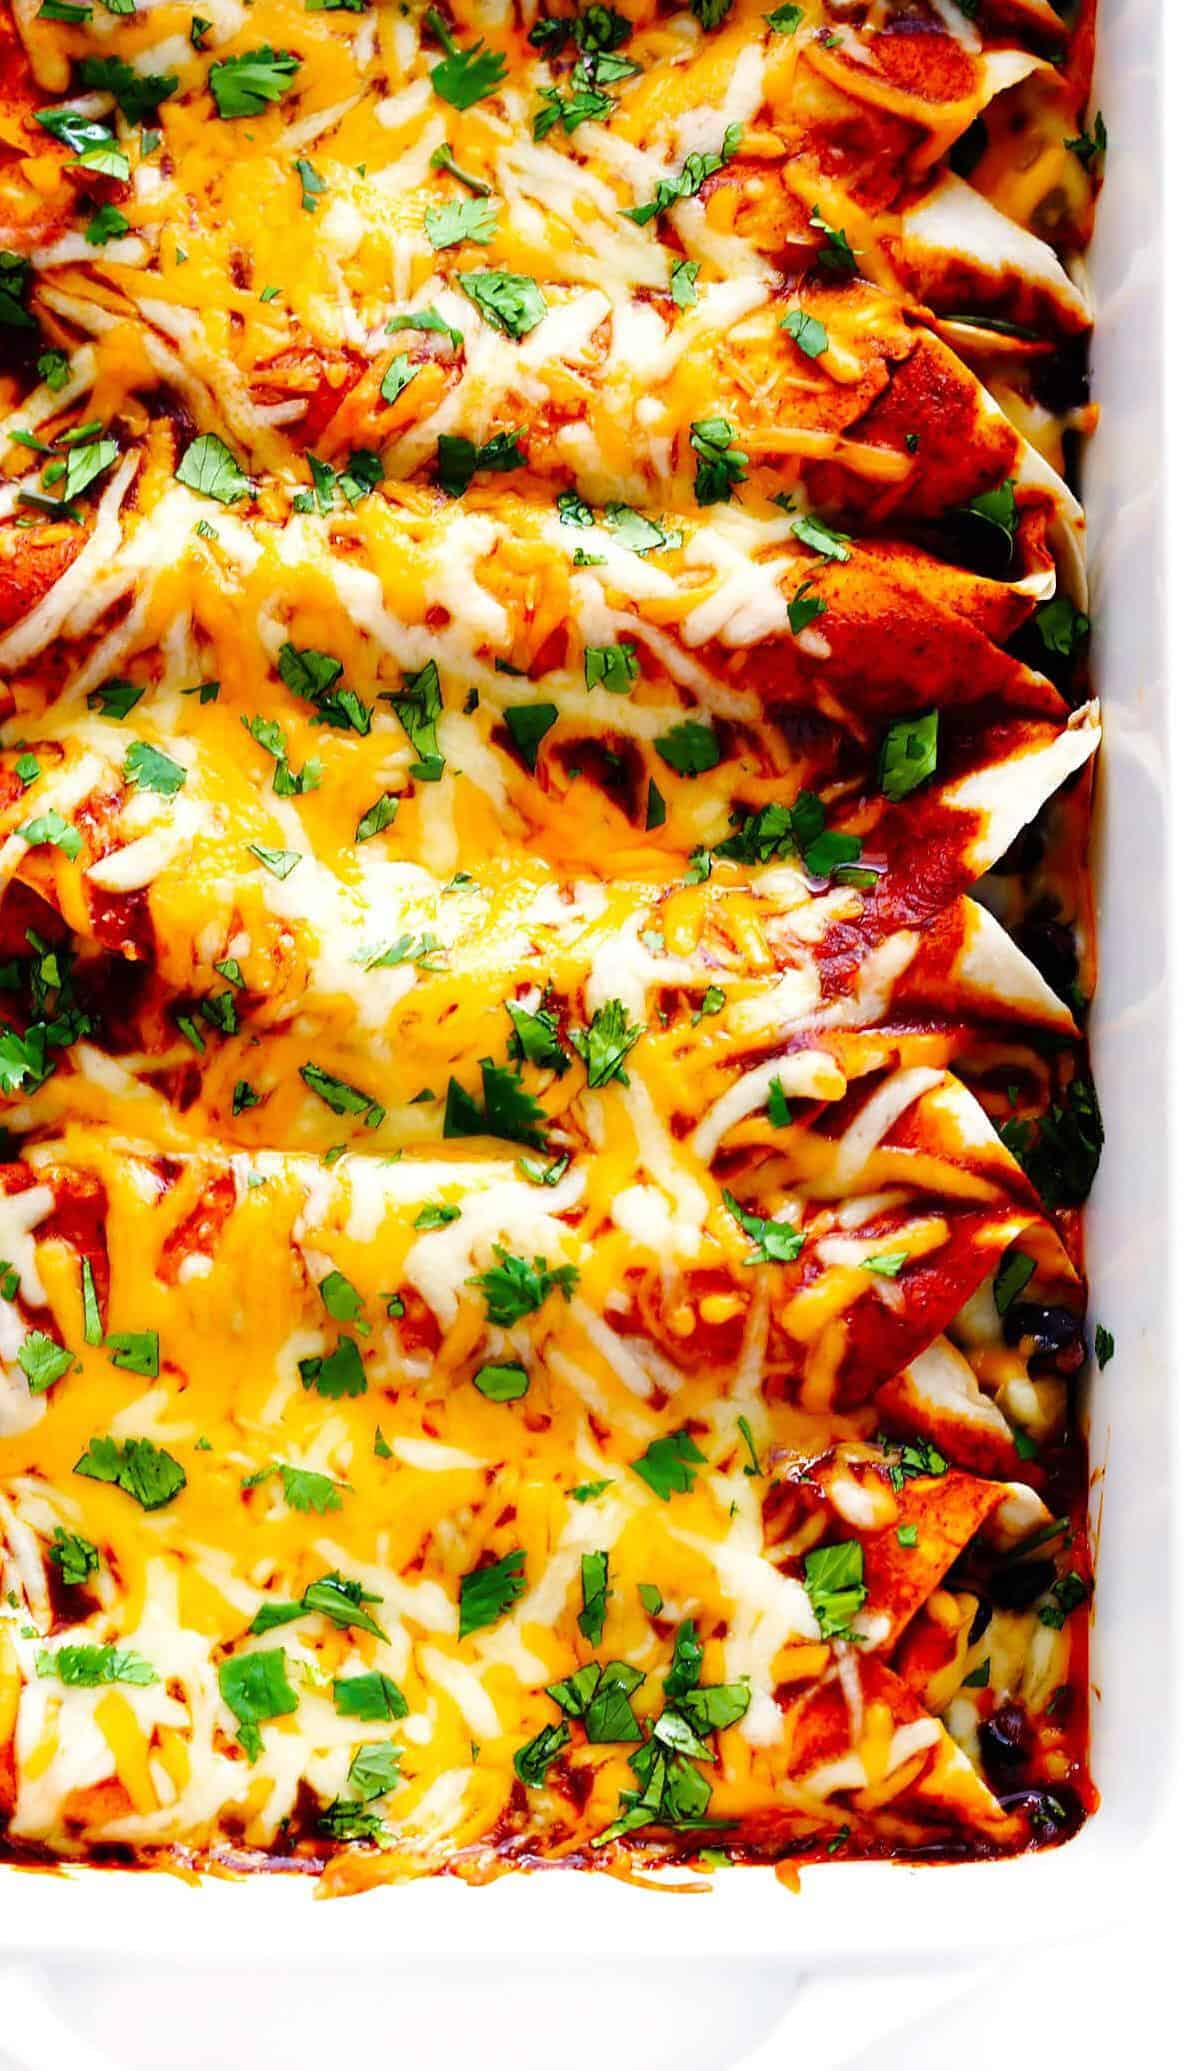  Fiery red sauce and melted cheese make these enchiladas irresistible.